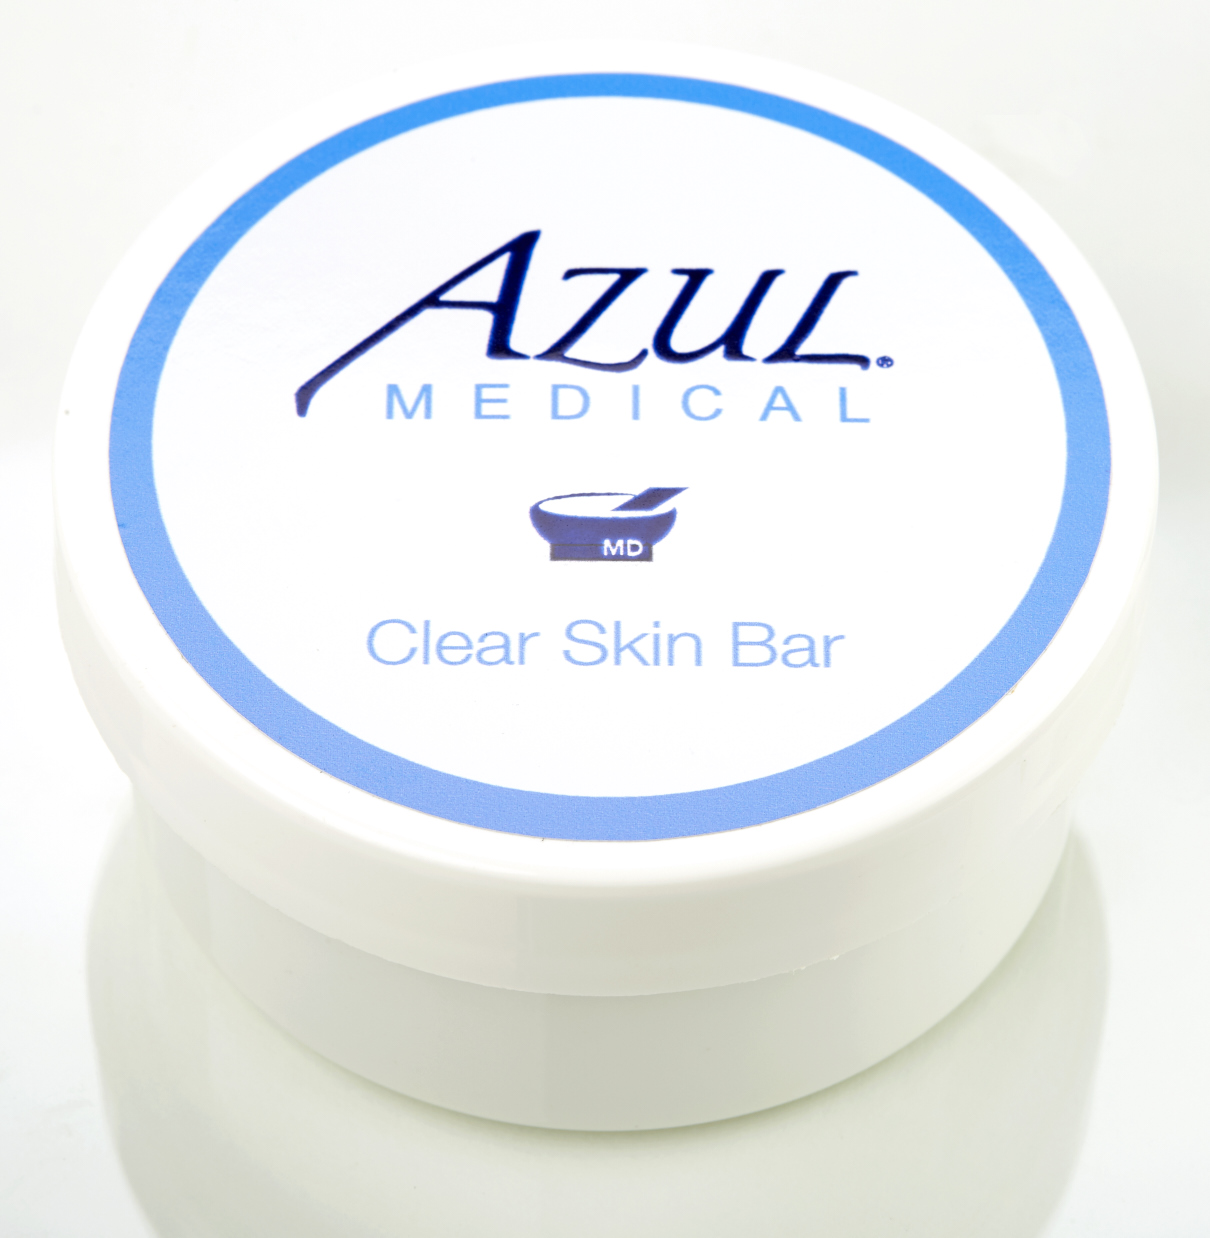 Facial Cleanser Fort Myers FL | Cleansing Bar | Salicylic Acid Face Wash